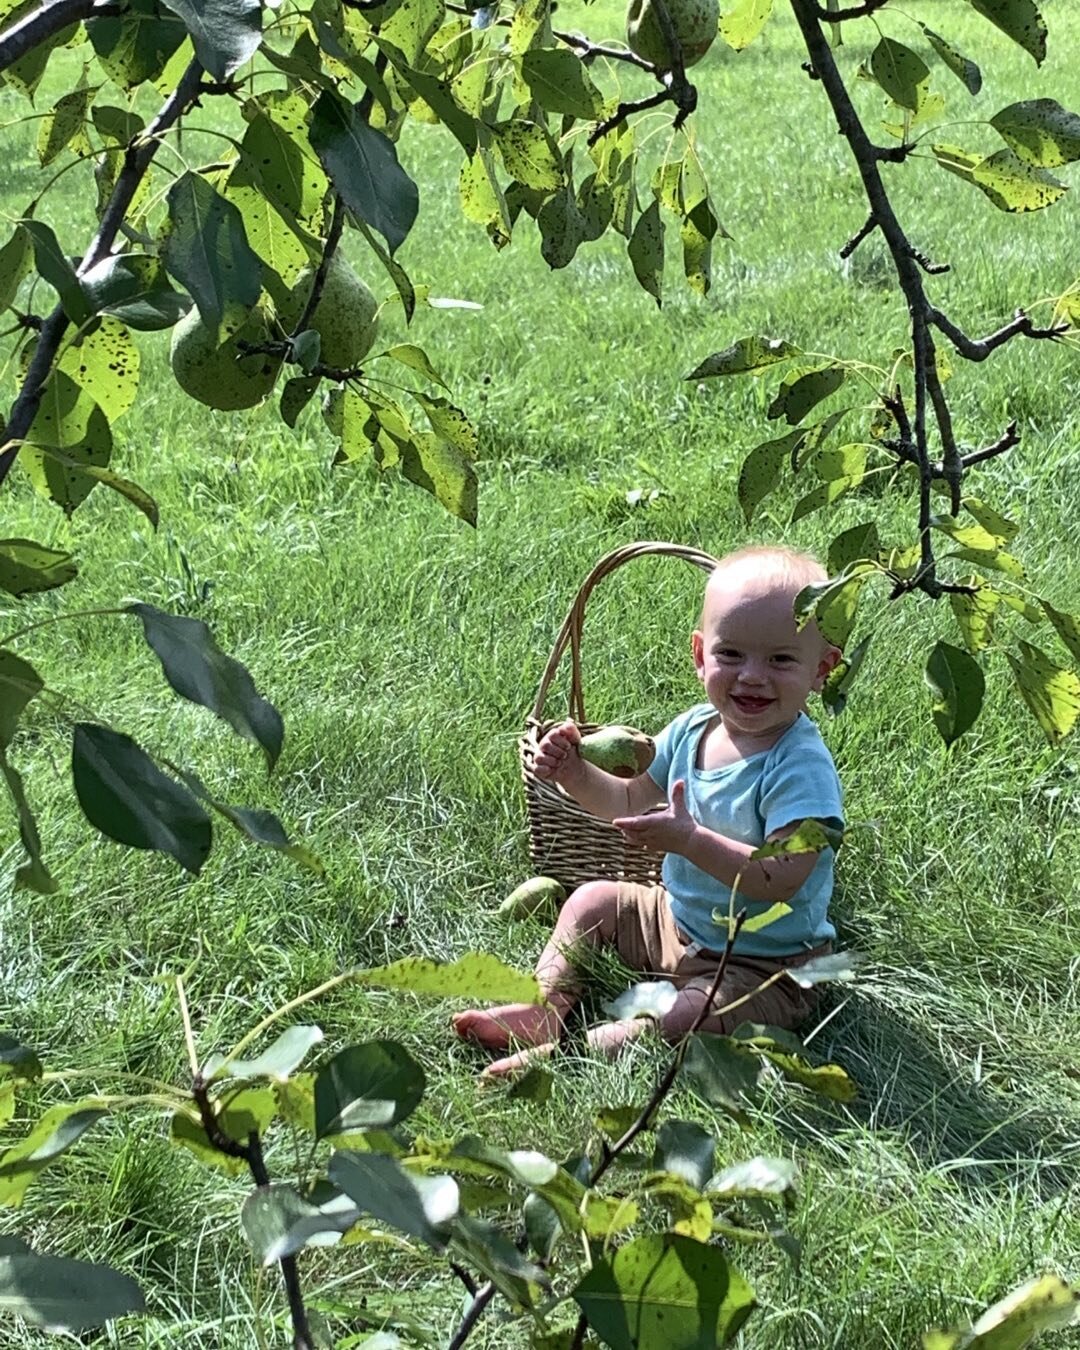 Young orchard helper Hazel harvesting Patten Pears.
#organicpears #organicorchard